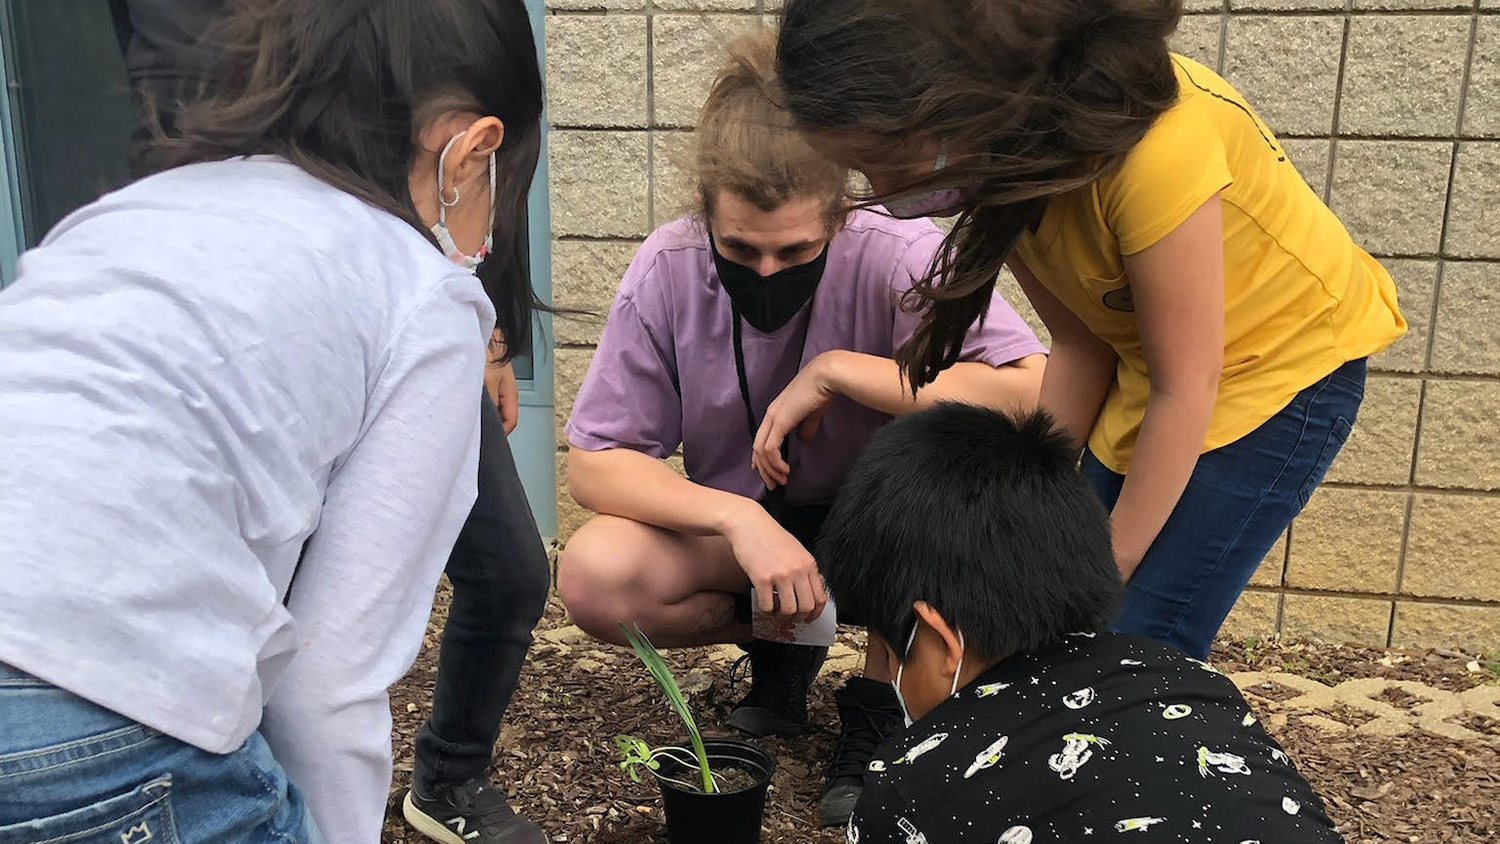 Students observe a plan - NC State Project Promotes STEM Education at Dillard Drive Elementary - College of Natural Resources News NC State University